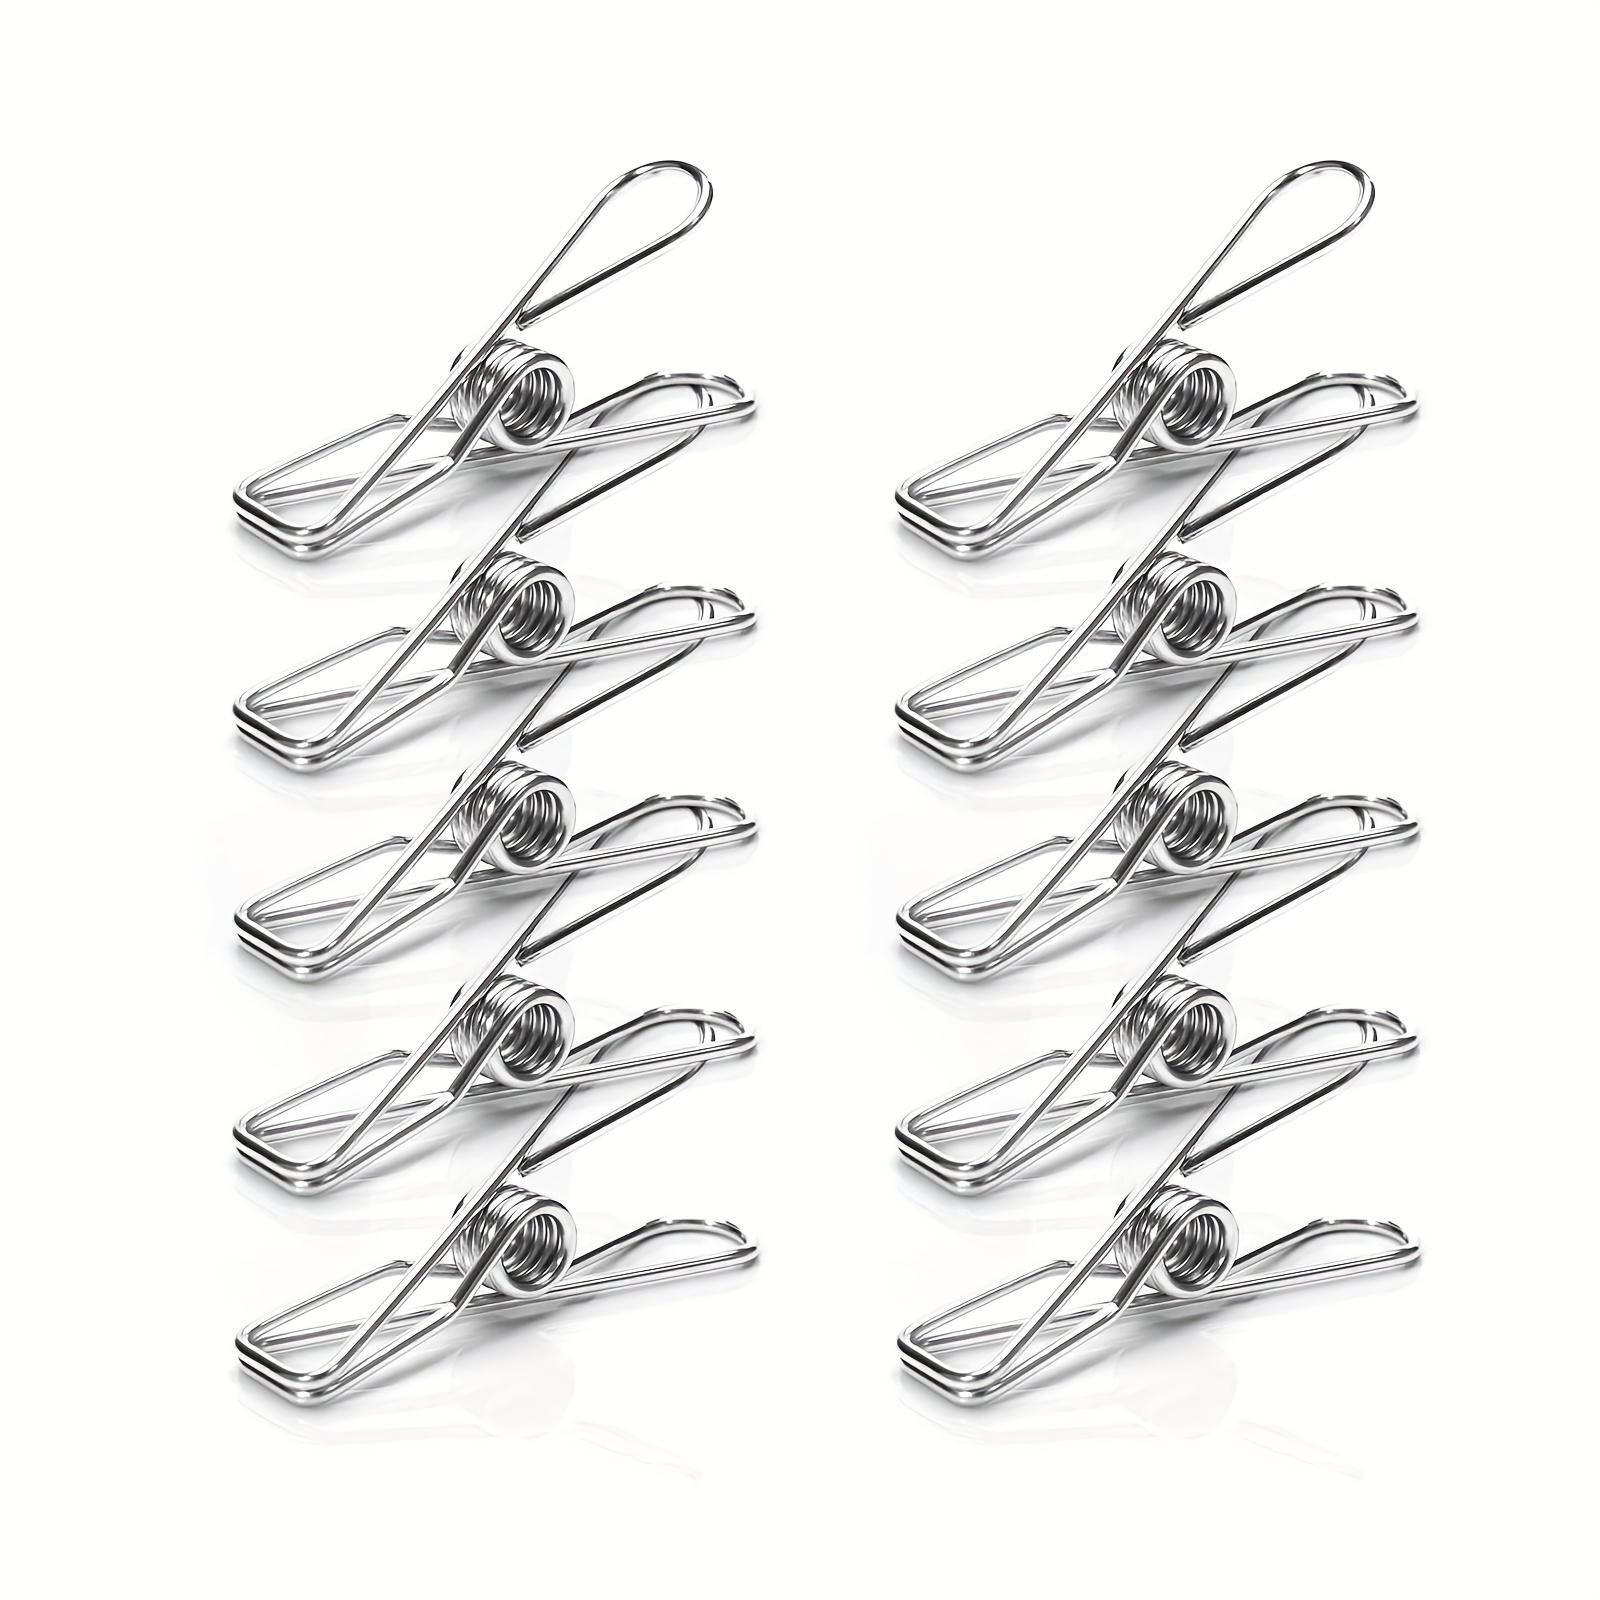 Vida Picks Wire Clothespins Laundry Chip Clips-40 Pack Bulk Clothes Pins with Heavy Duty, Durable Clamp Metal Clothes Pegs Multi-Purpose for Outdoor Clothesline